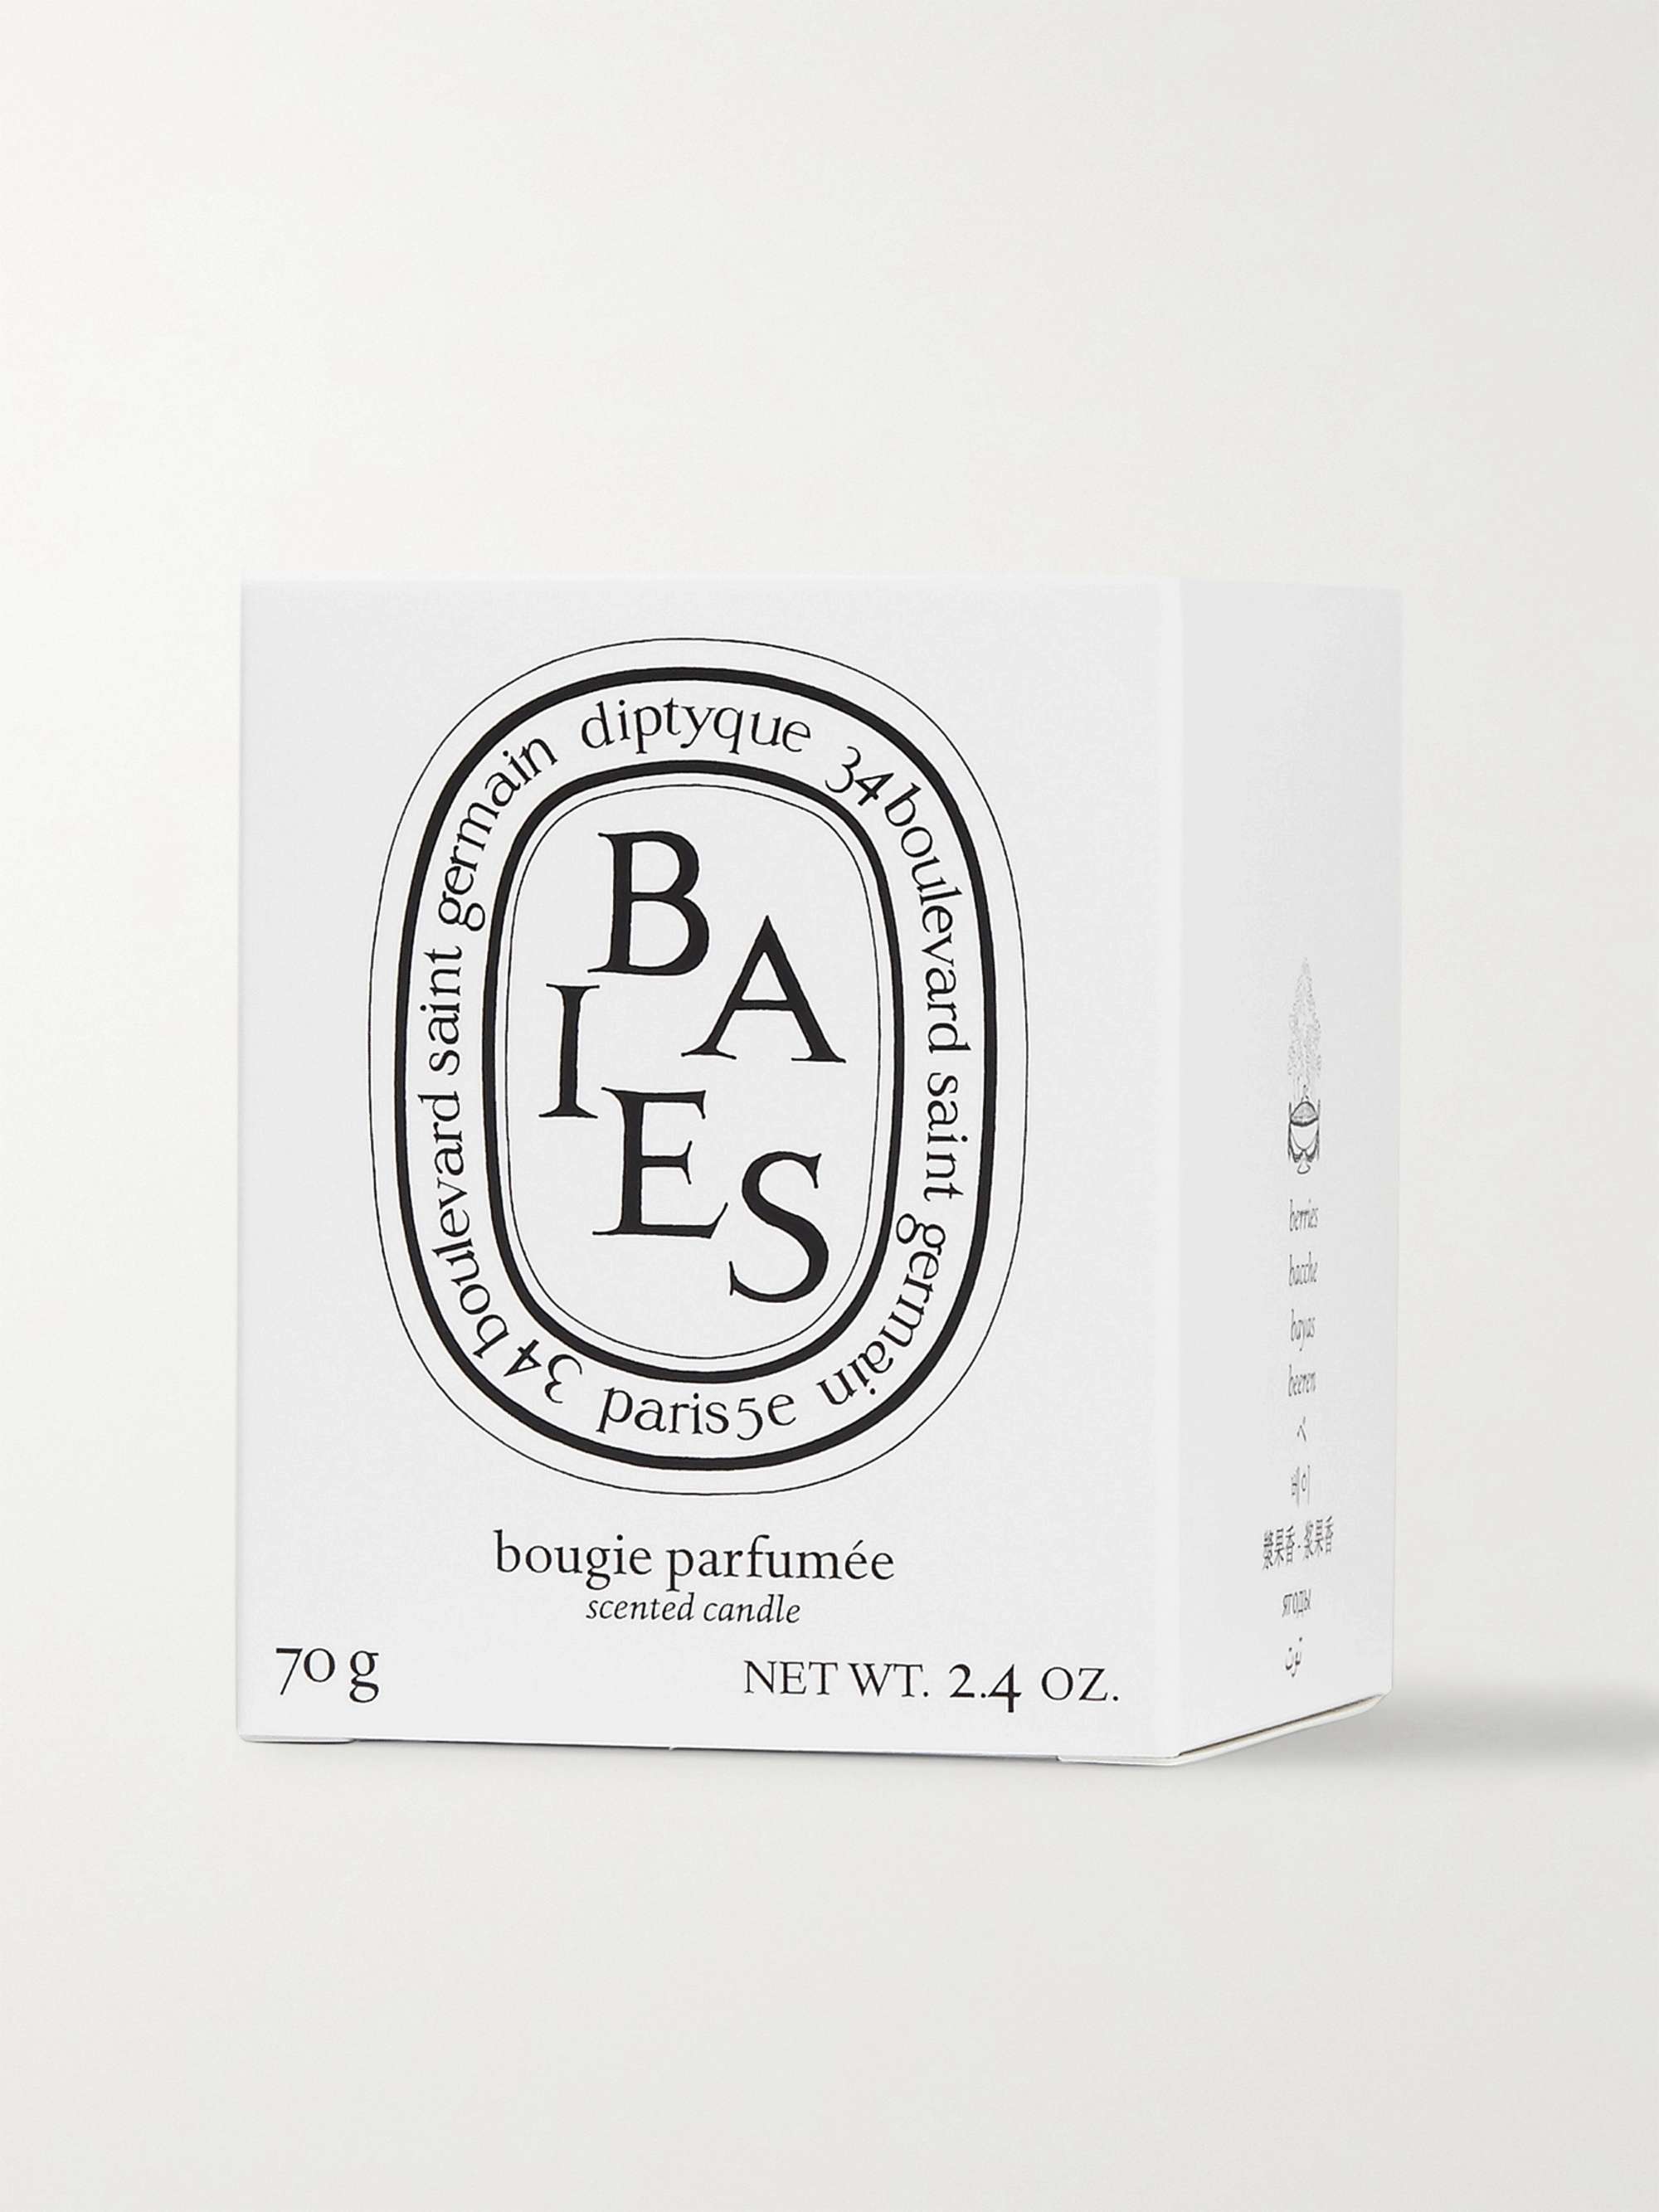 DIPTYQUE Baies Scented Candle, 70g | MR PORTER